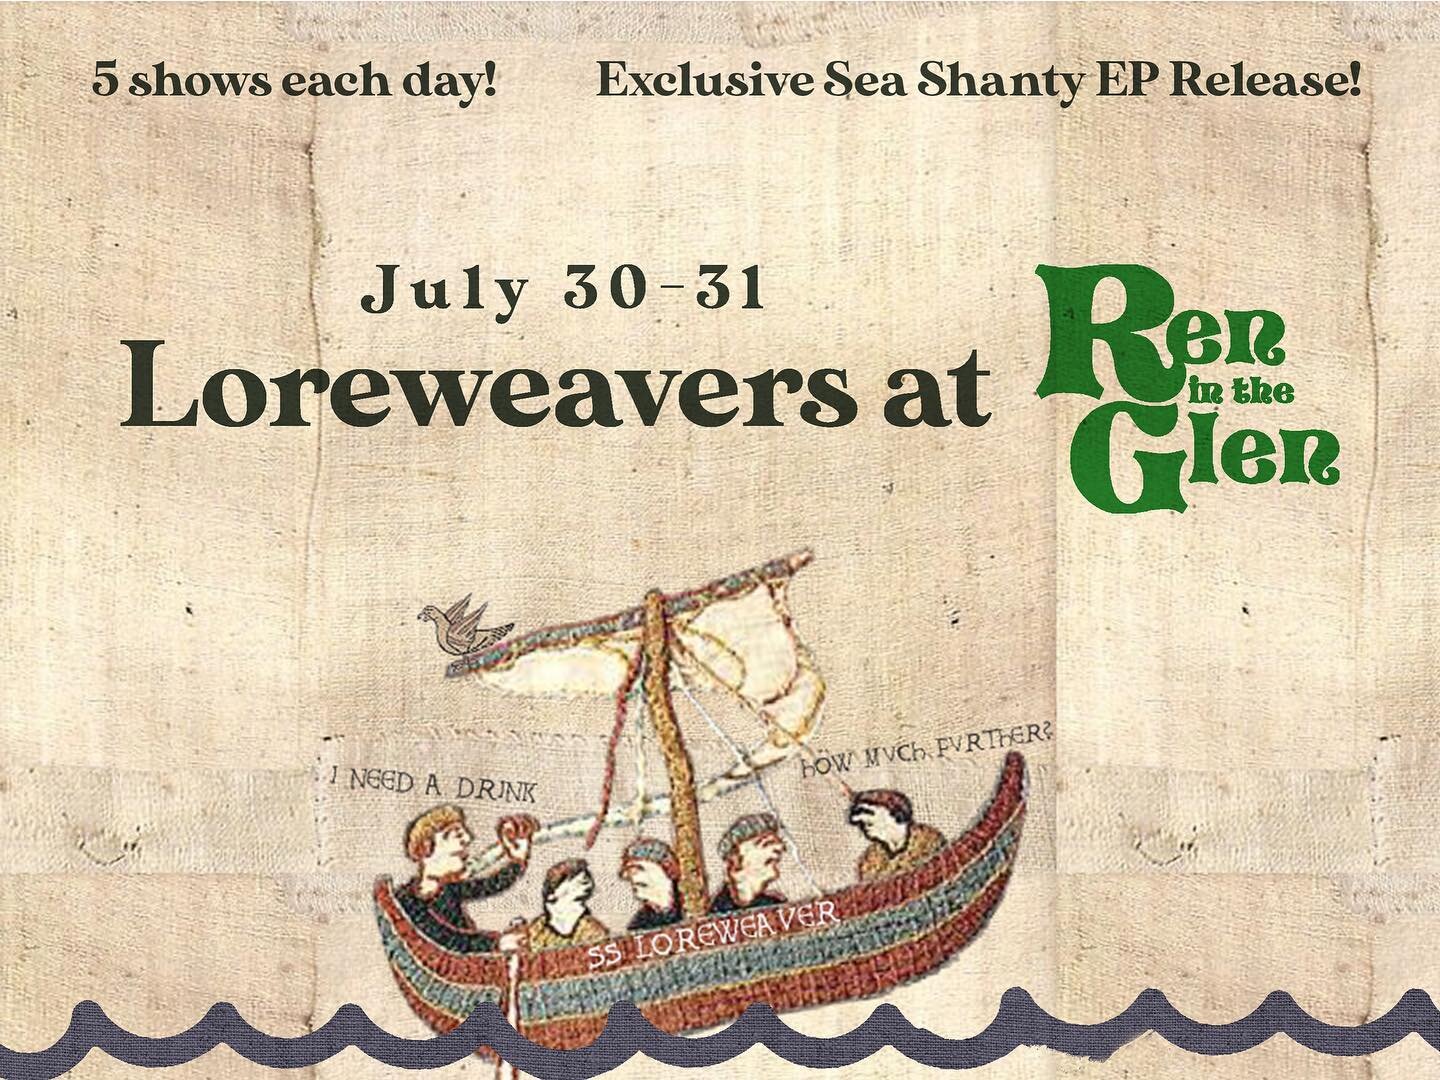 ⚓️🔥Avast, ye scallywags!🔥⚓️ One week from today we will be gracing the stages of Ren in the Glen, and it will be the ONLY place you&rsquo;ll be able to snag a physical copy of our new sea shanty EP, &ldquo;Maiden Voyage&rdquo; before we release it 